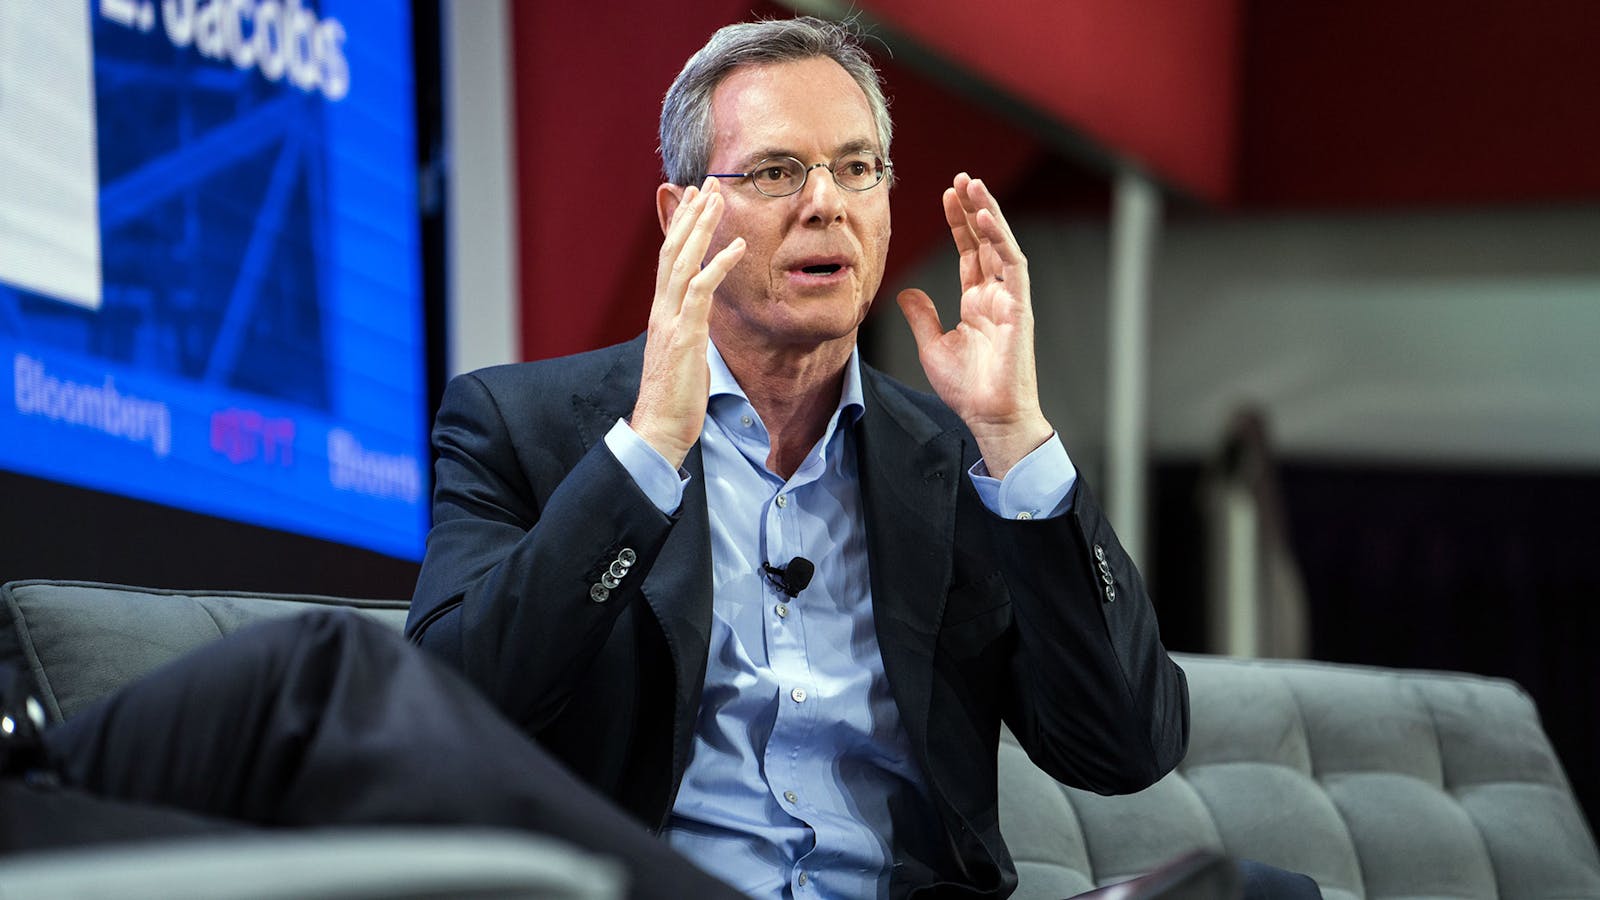 Former Qualcomm executive chairman and CEO Paul Jacobs. Photo: Bloomberg